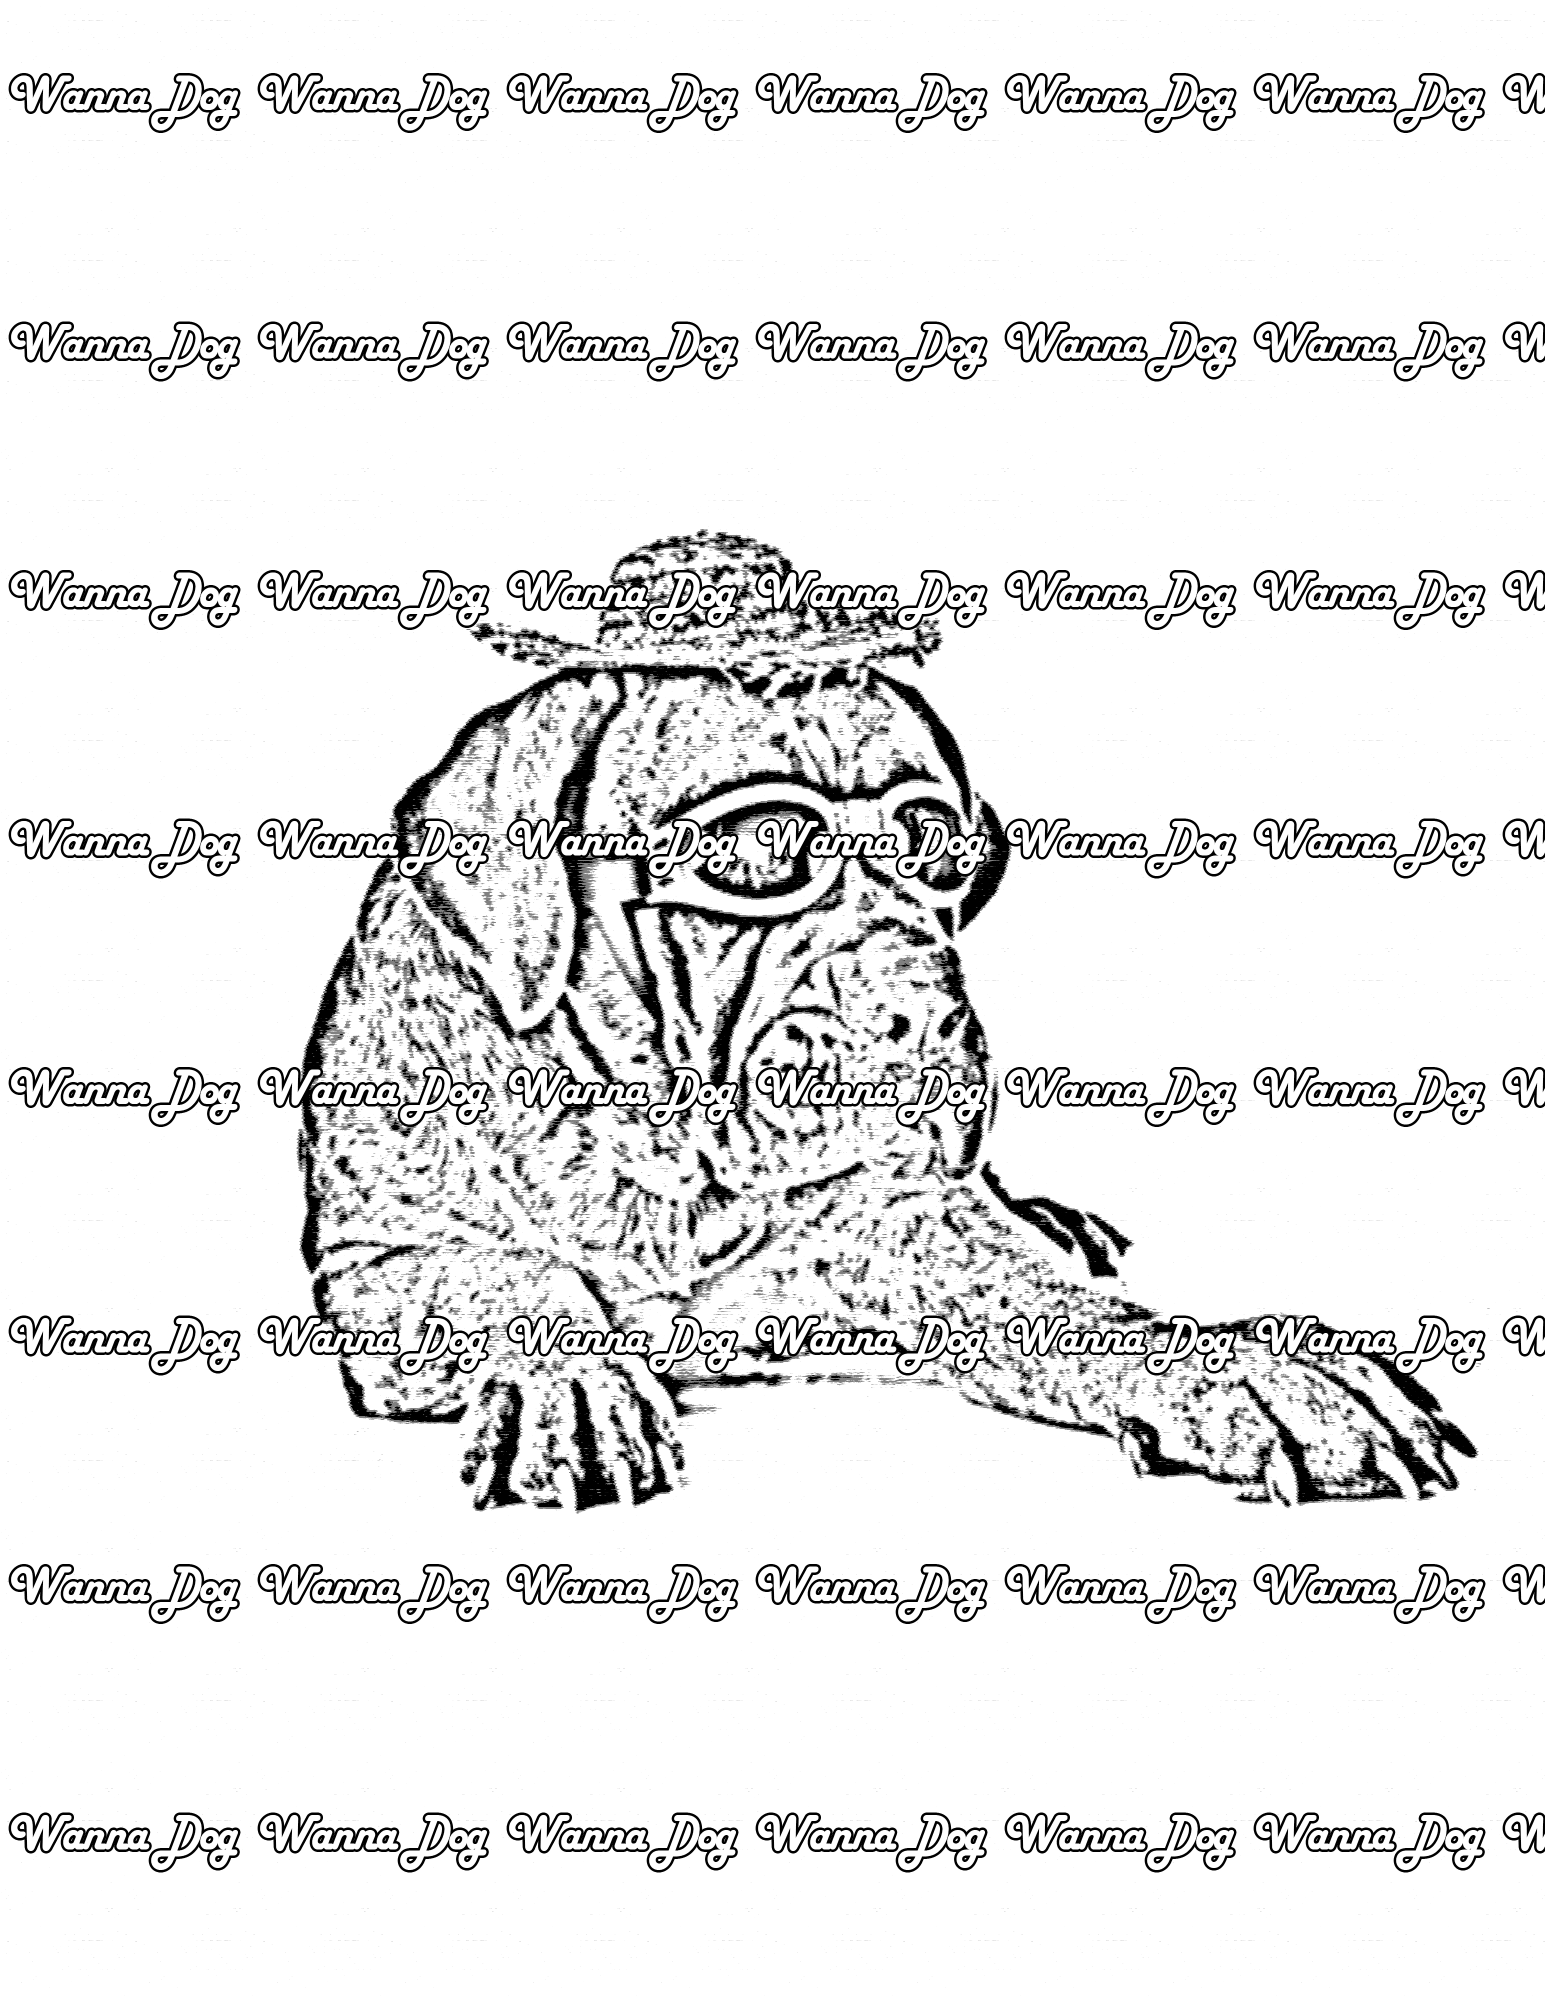 Mastiff Coloring Page of a Mastiff wearing a hat and glasses